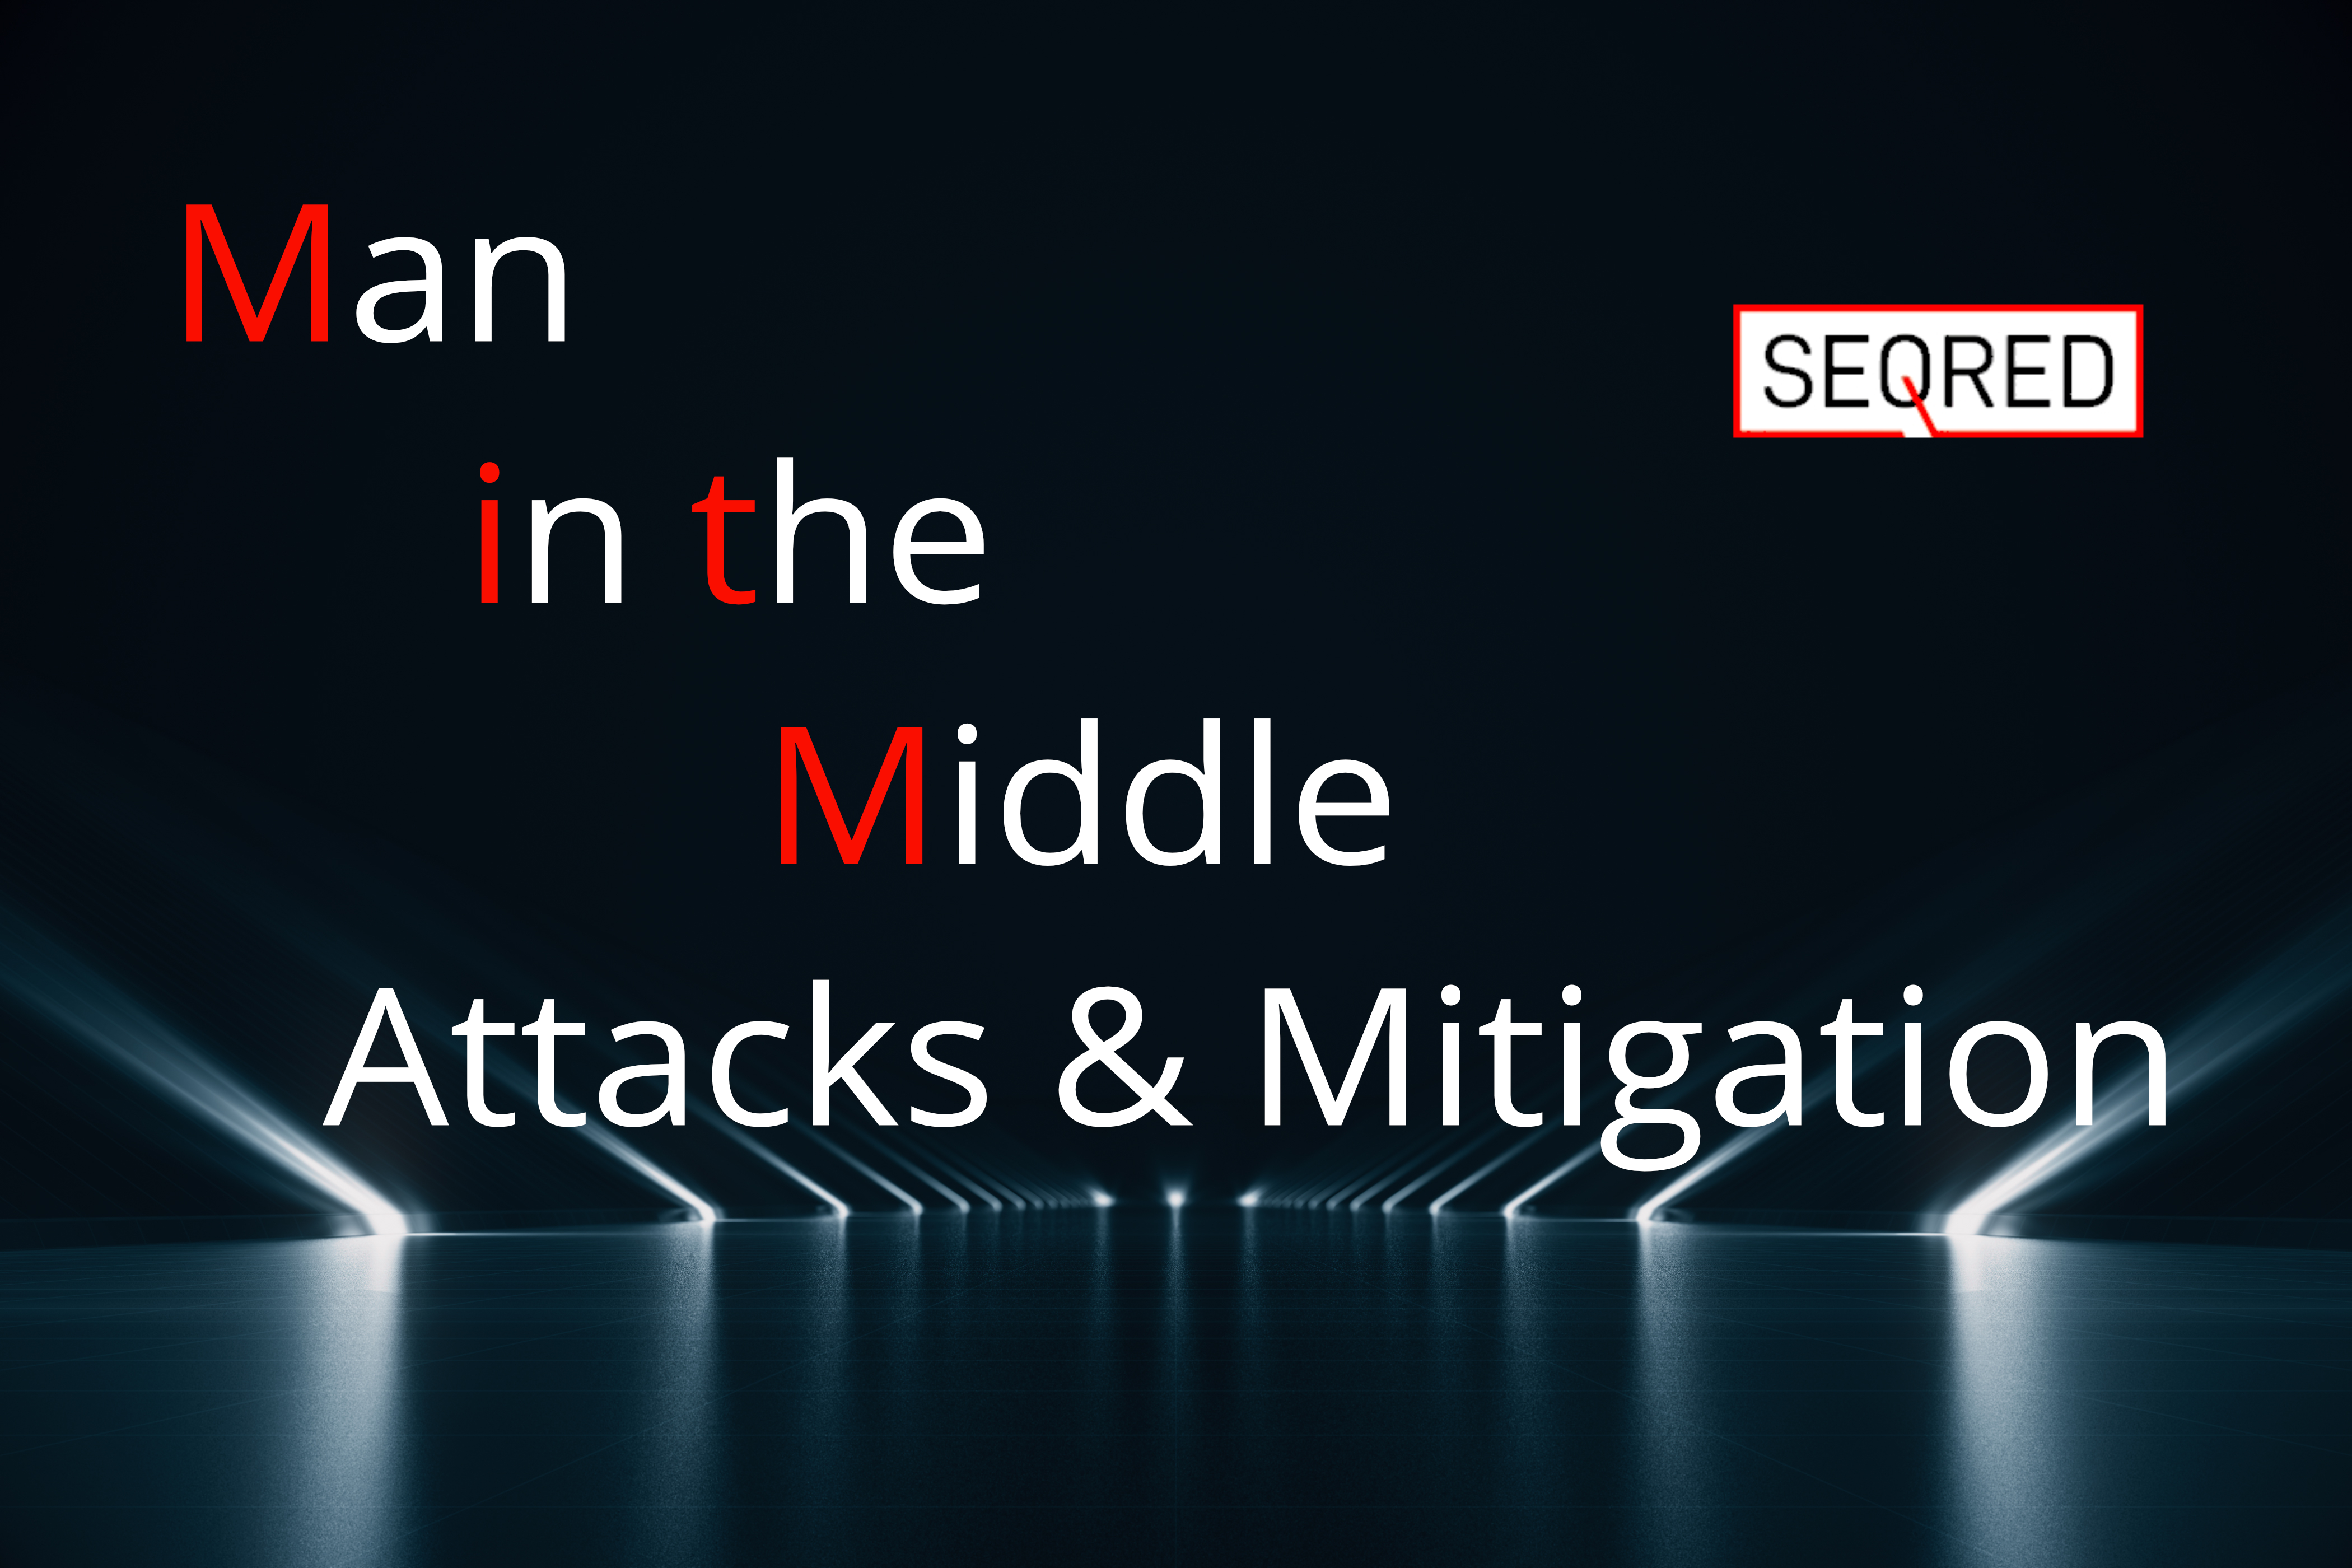 Man in the middle attacks & mitigation